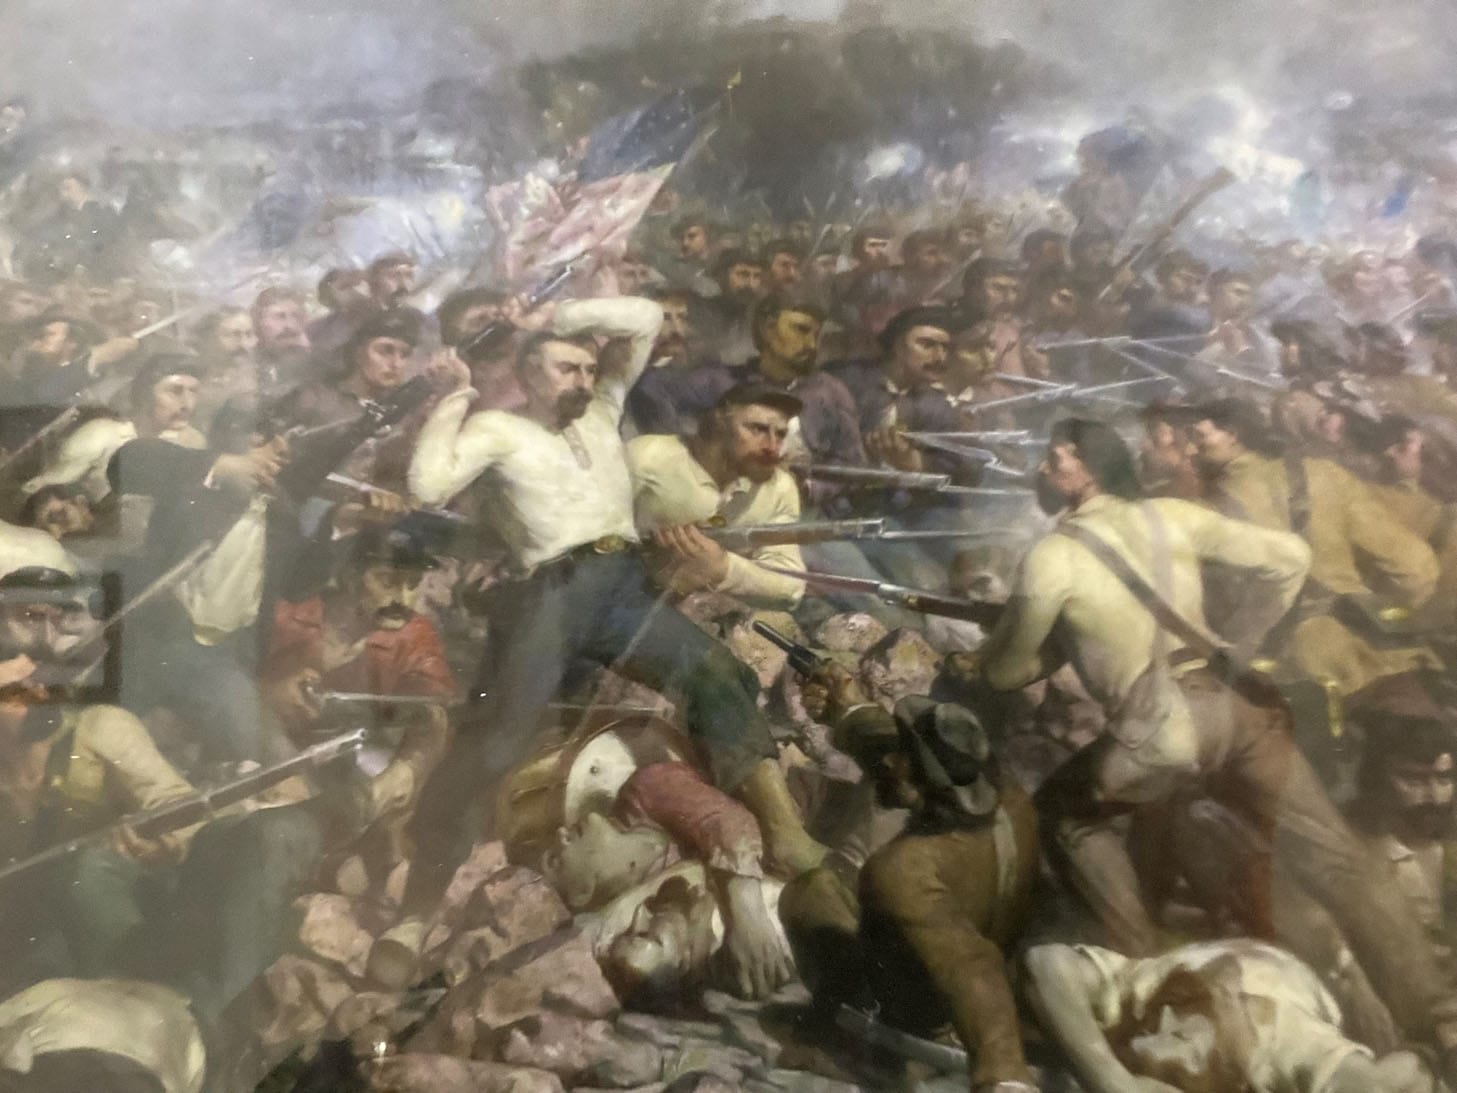 painting of the Battle of Gettysburg shows Private Hugh Bradley